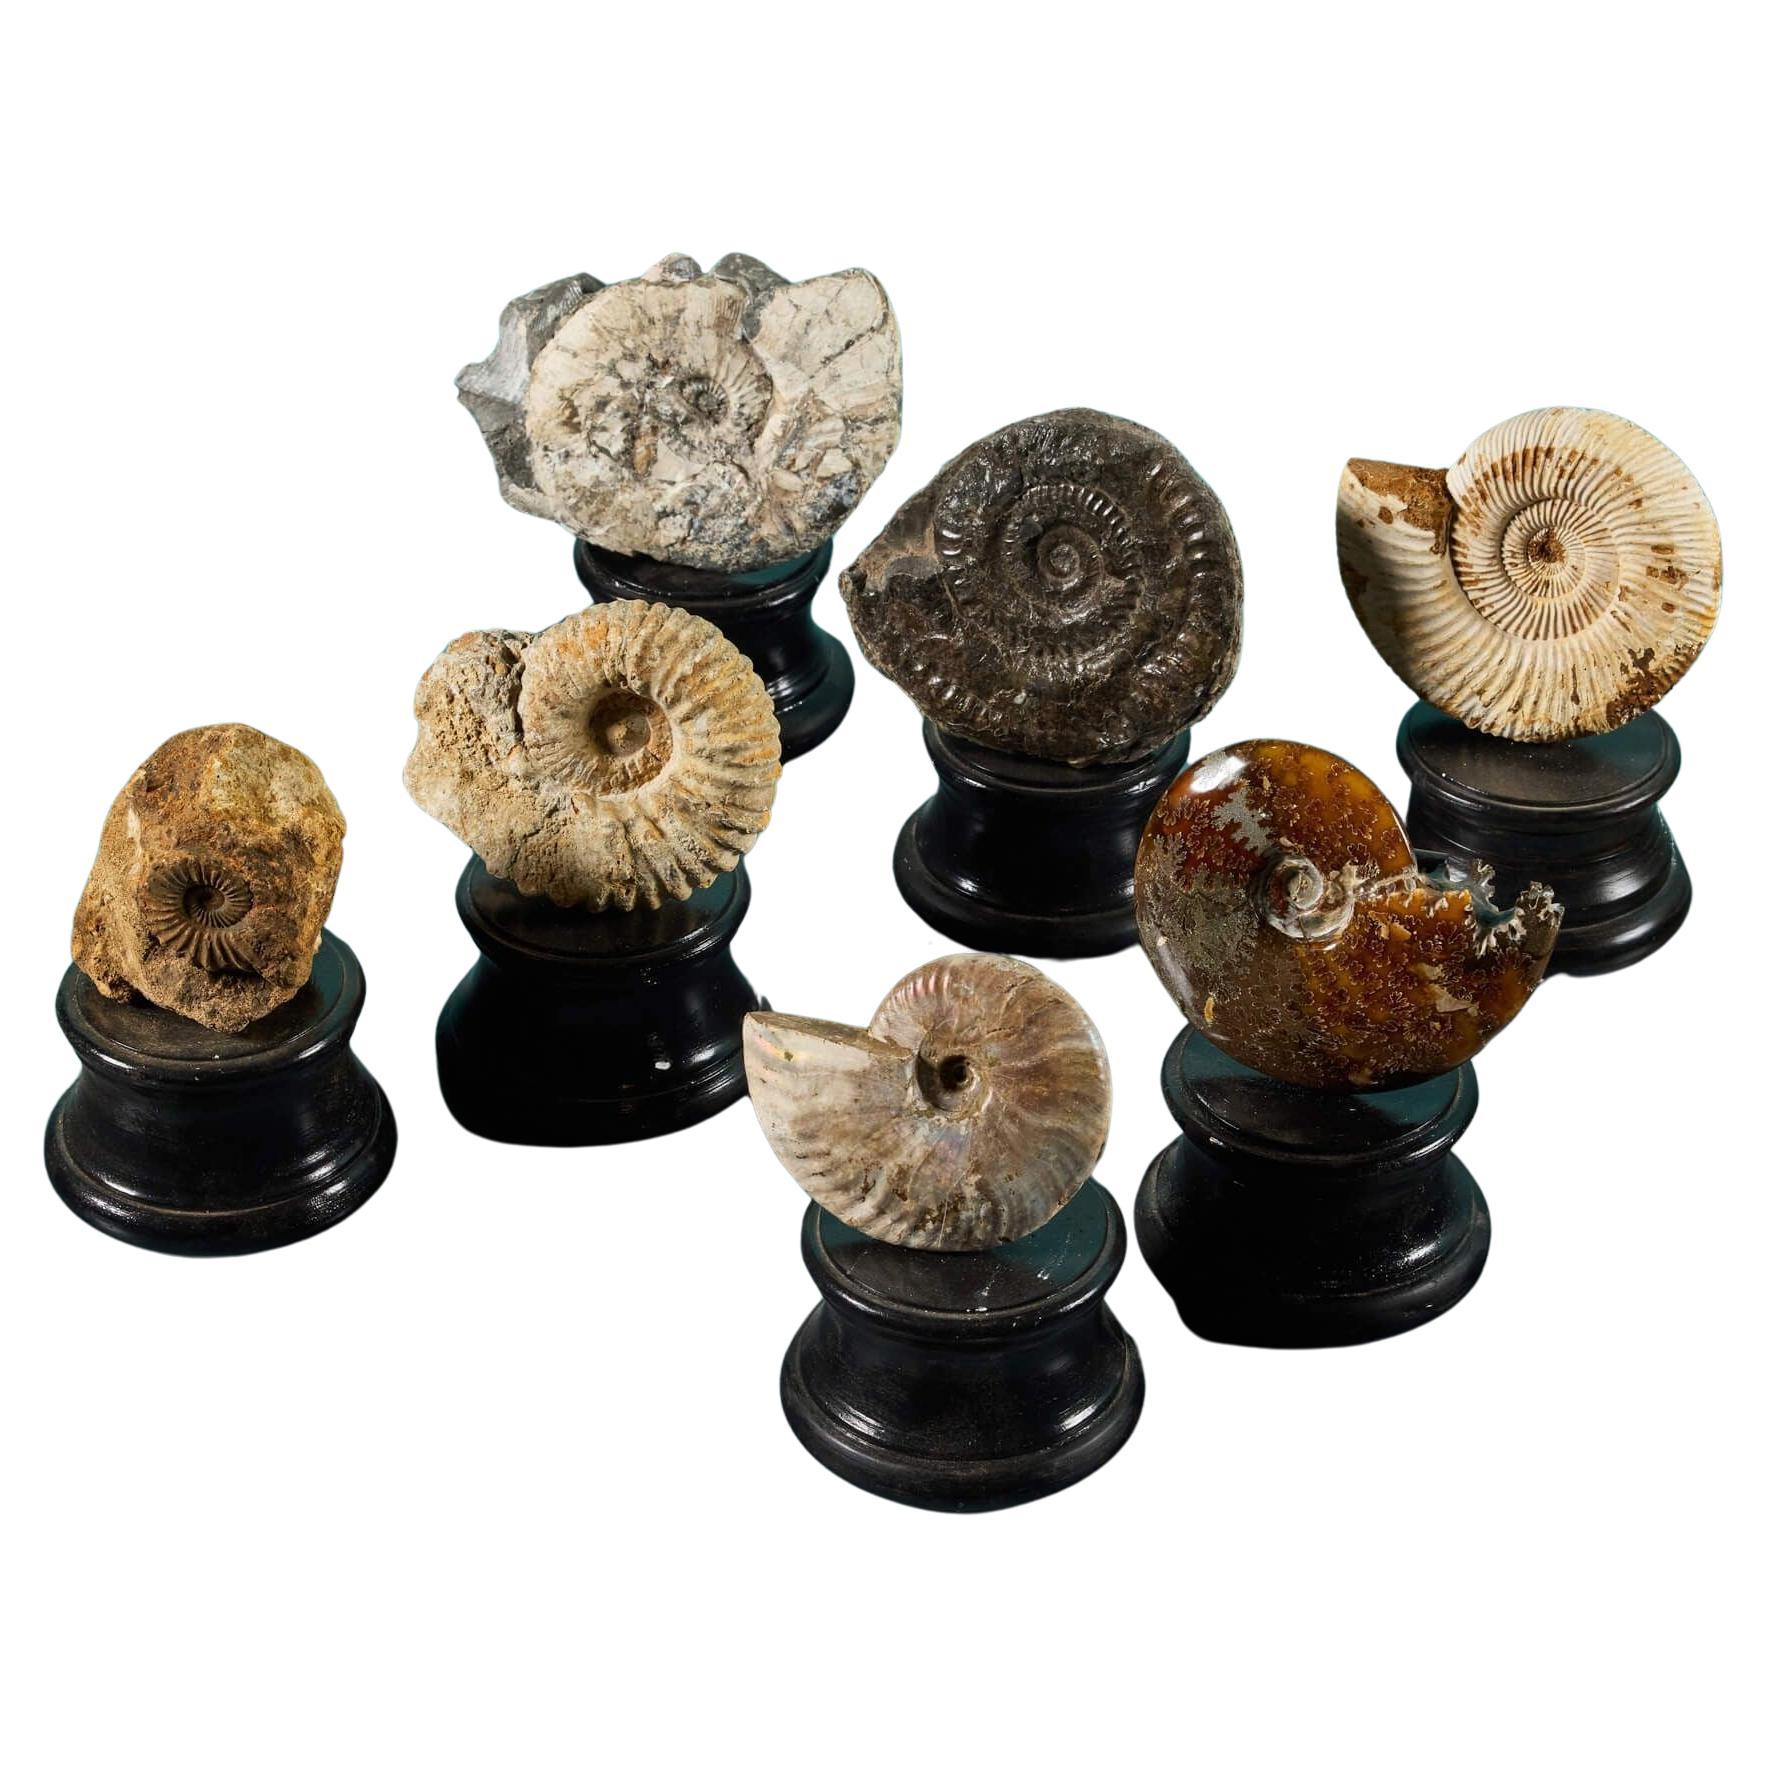 Collection of 7 Ammonite Fossils For Sale